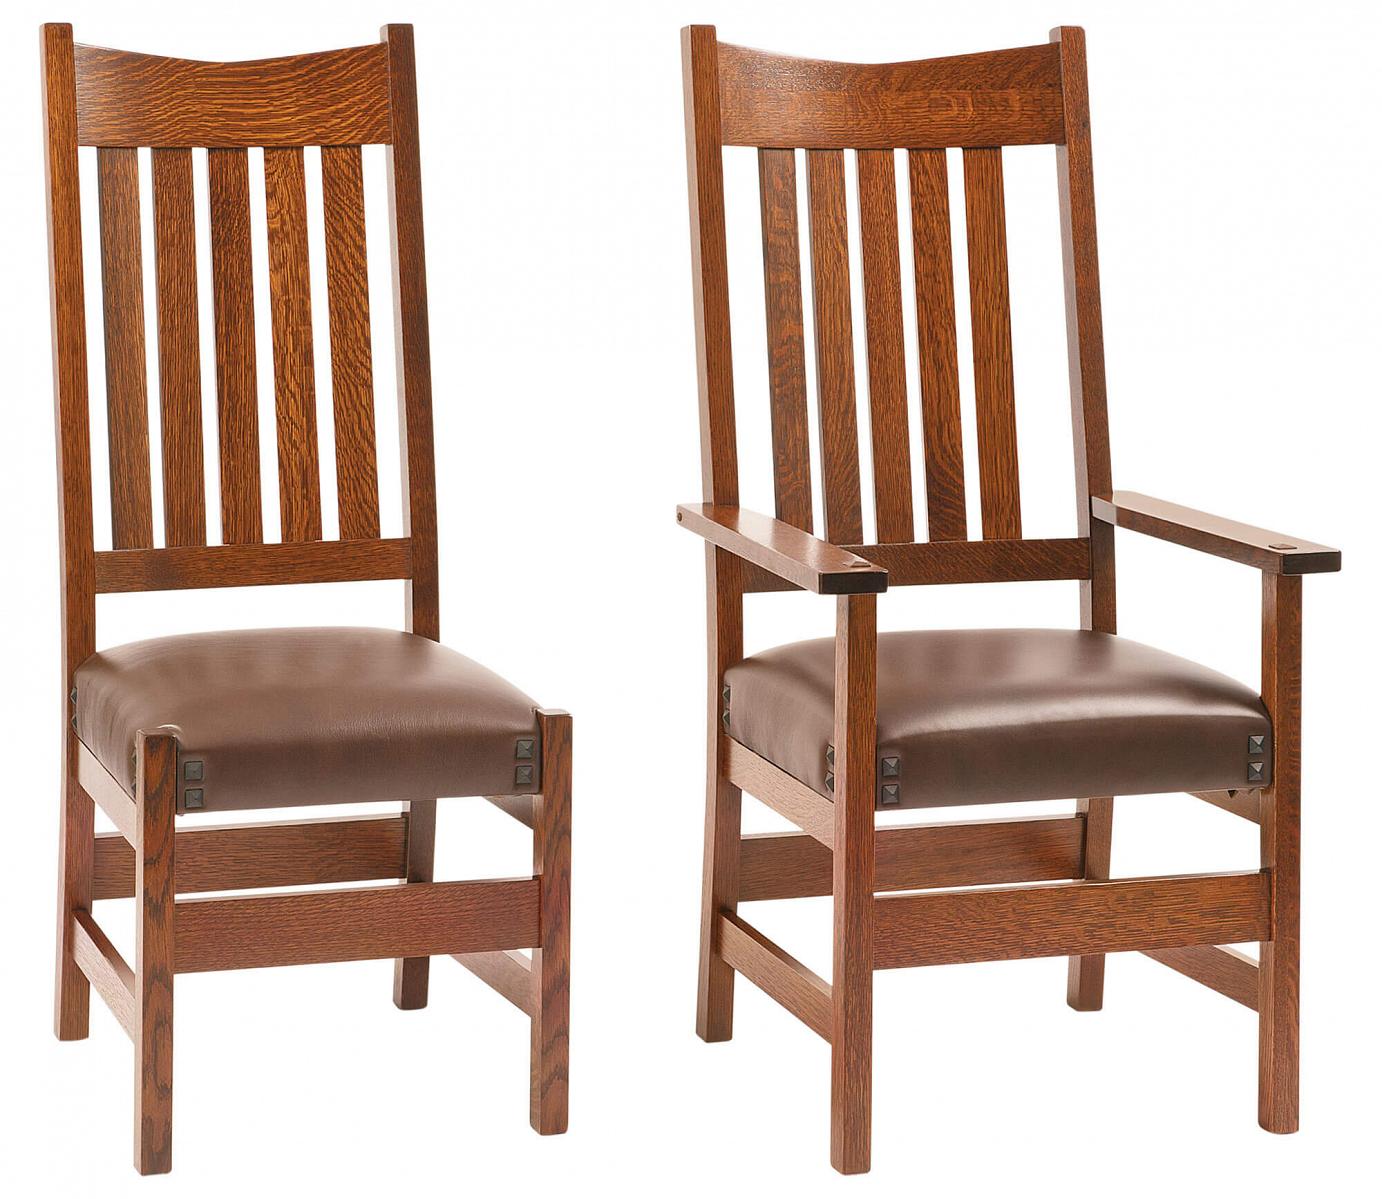 RH Yoder Conner Chairs